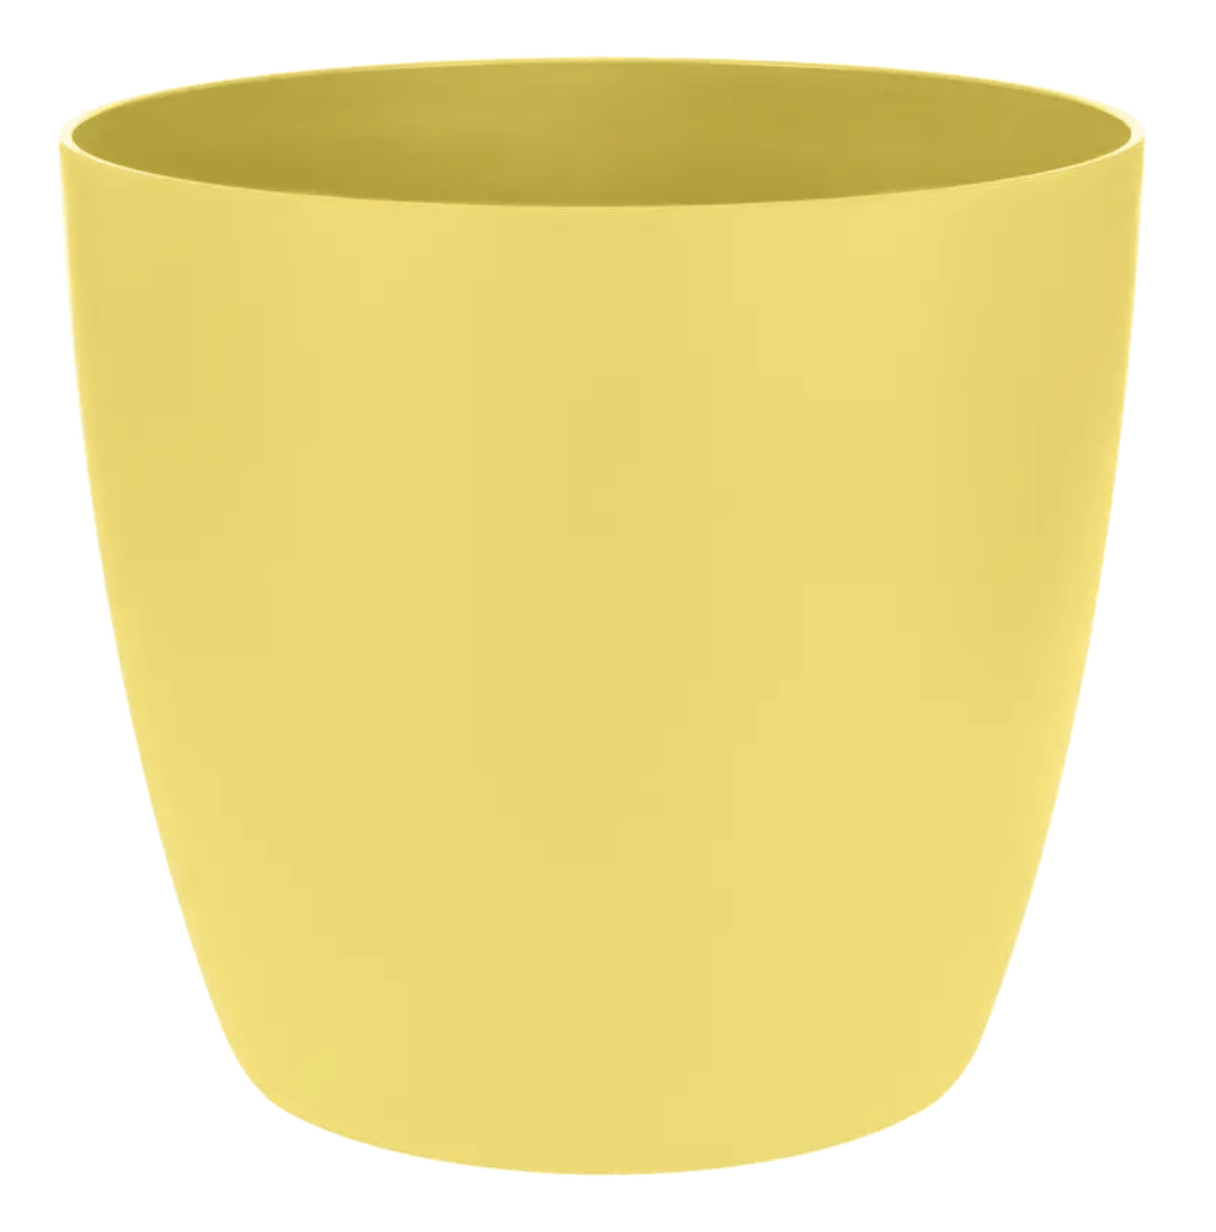 Elho Plant Pot 7cm / Yellow Recycled Plastic Plant Pot - 'brussels mini round' in Yellow